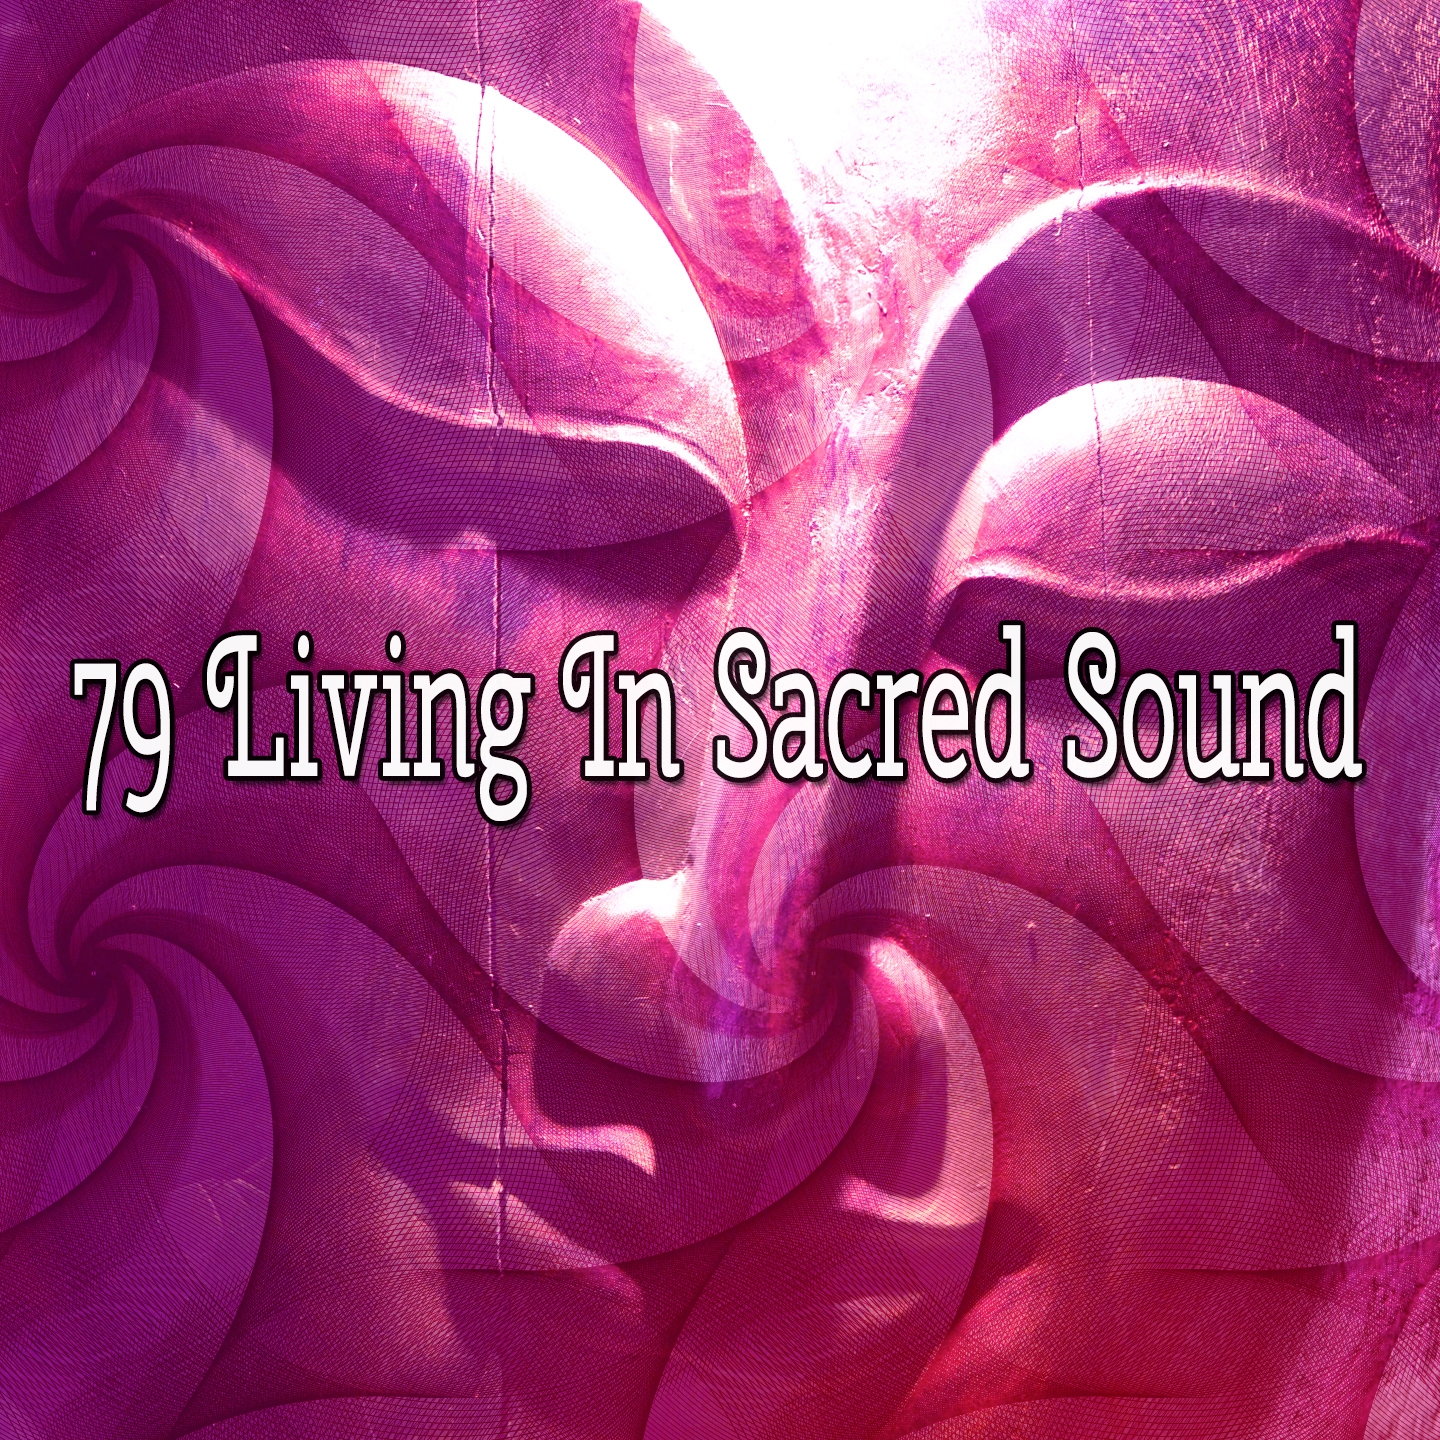 79 Living In Sacred Sound